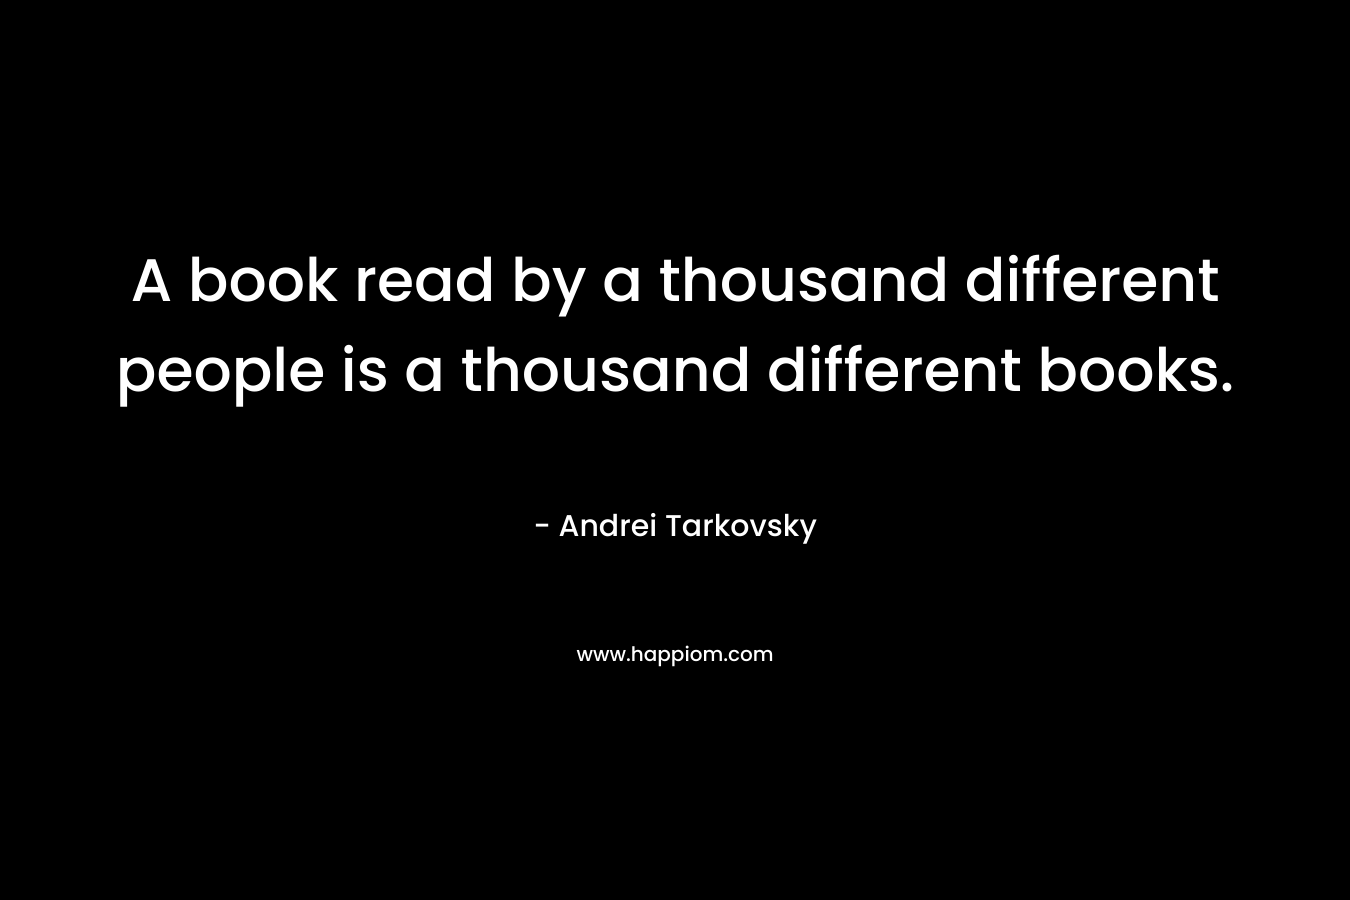 A book read by a thousand different people is a thousand different books.